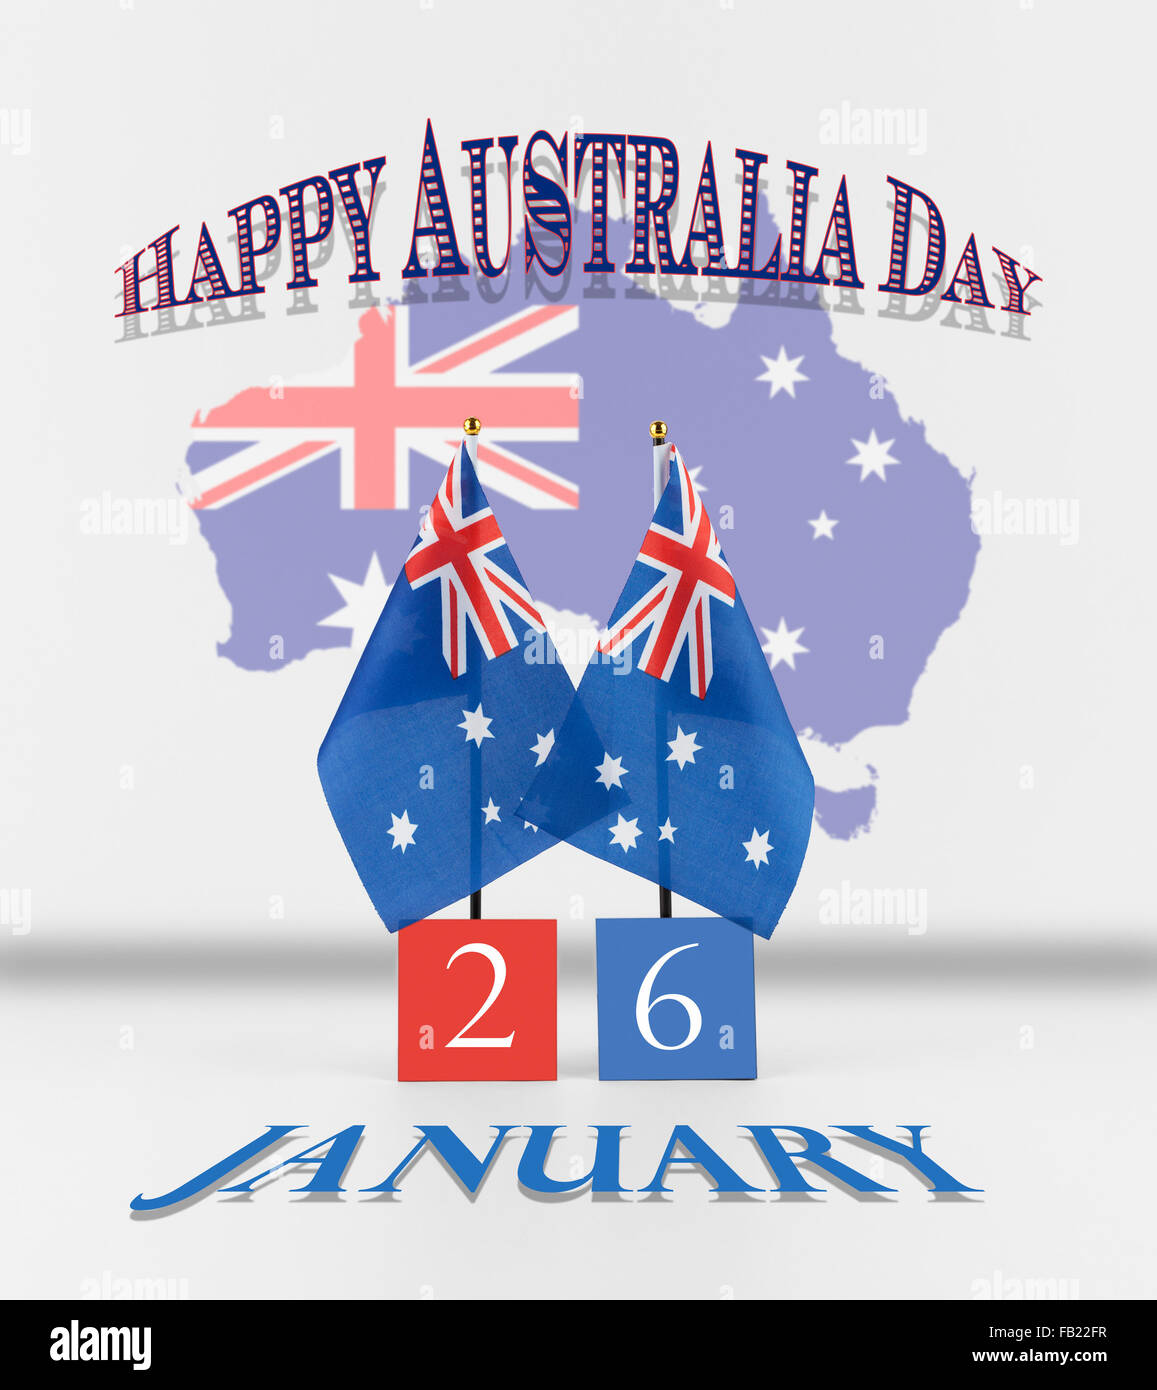 Australia Day greetings. Two Australian flags with date and map of Australia. Australian National isolated on whit Stock Photo - Alamy